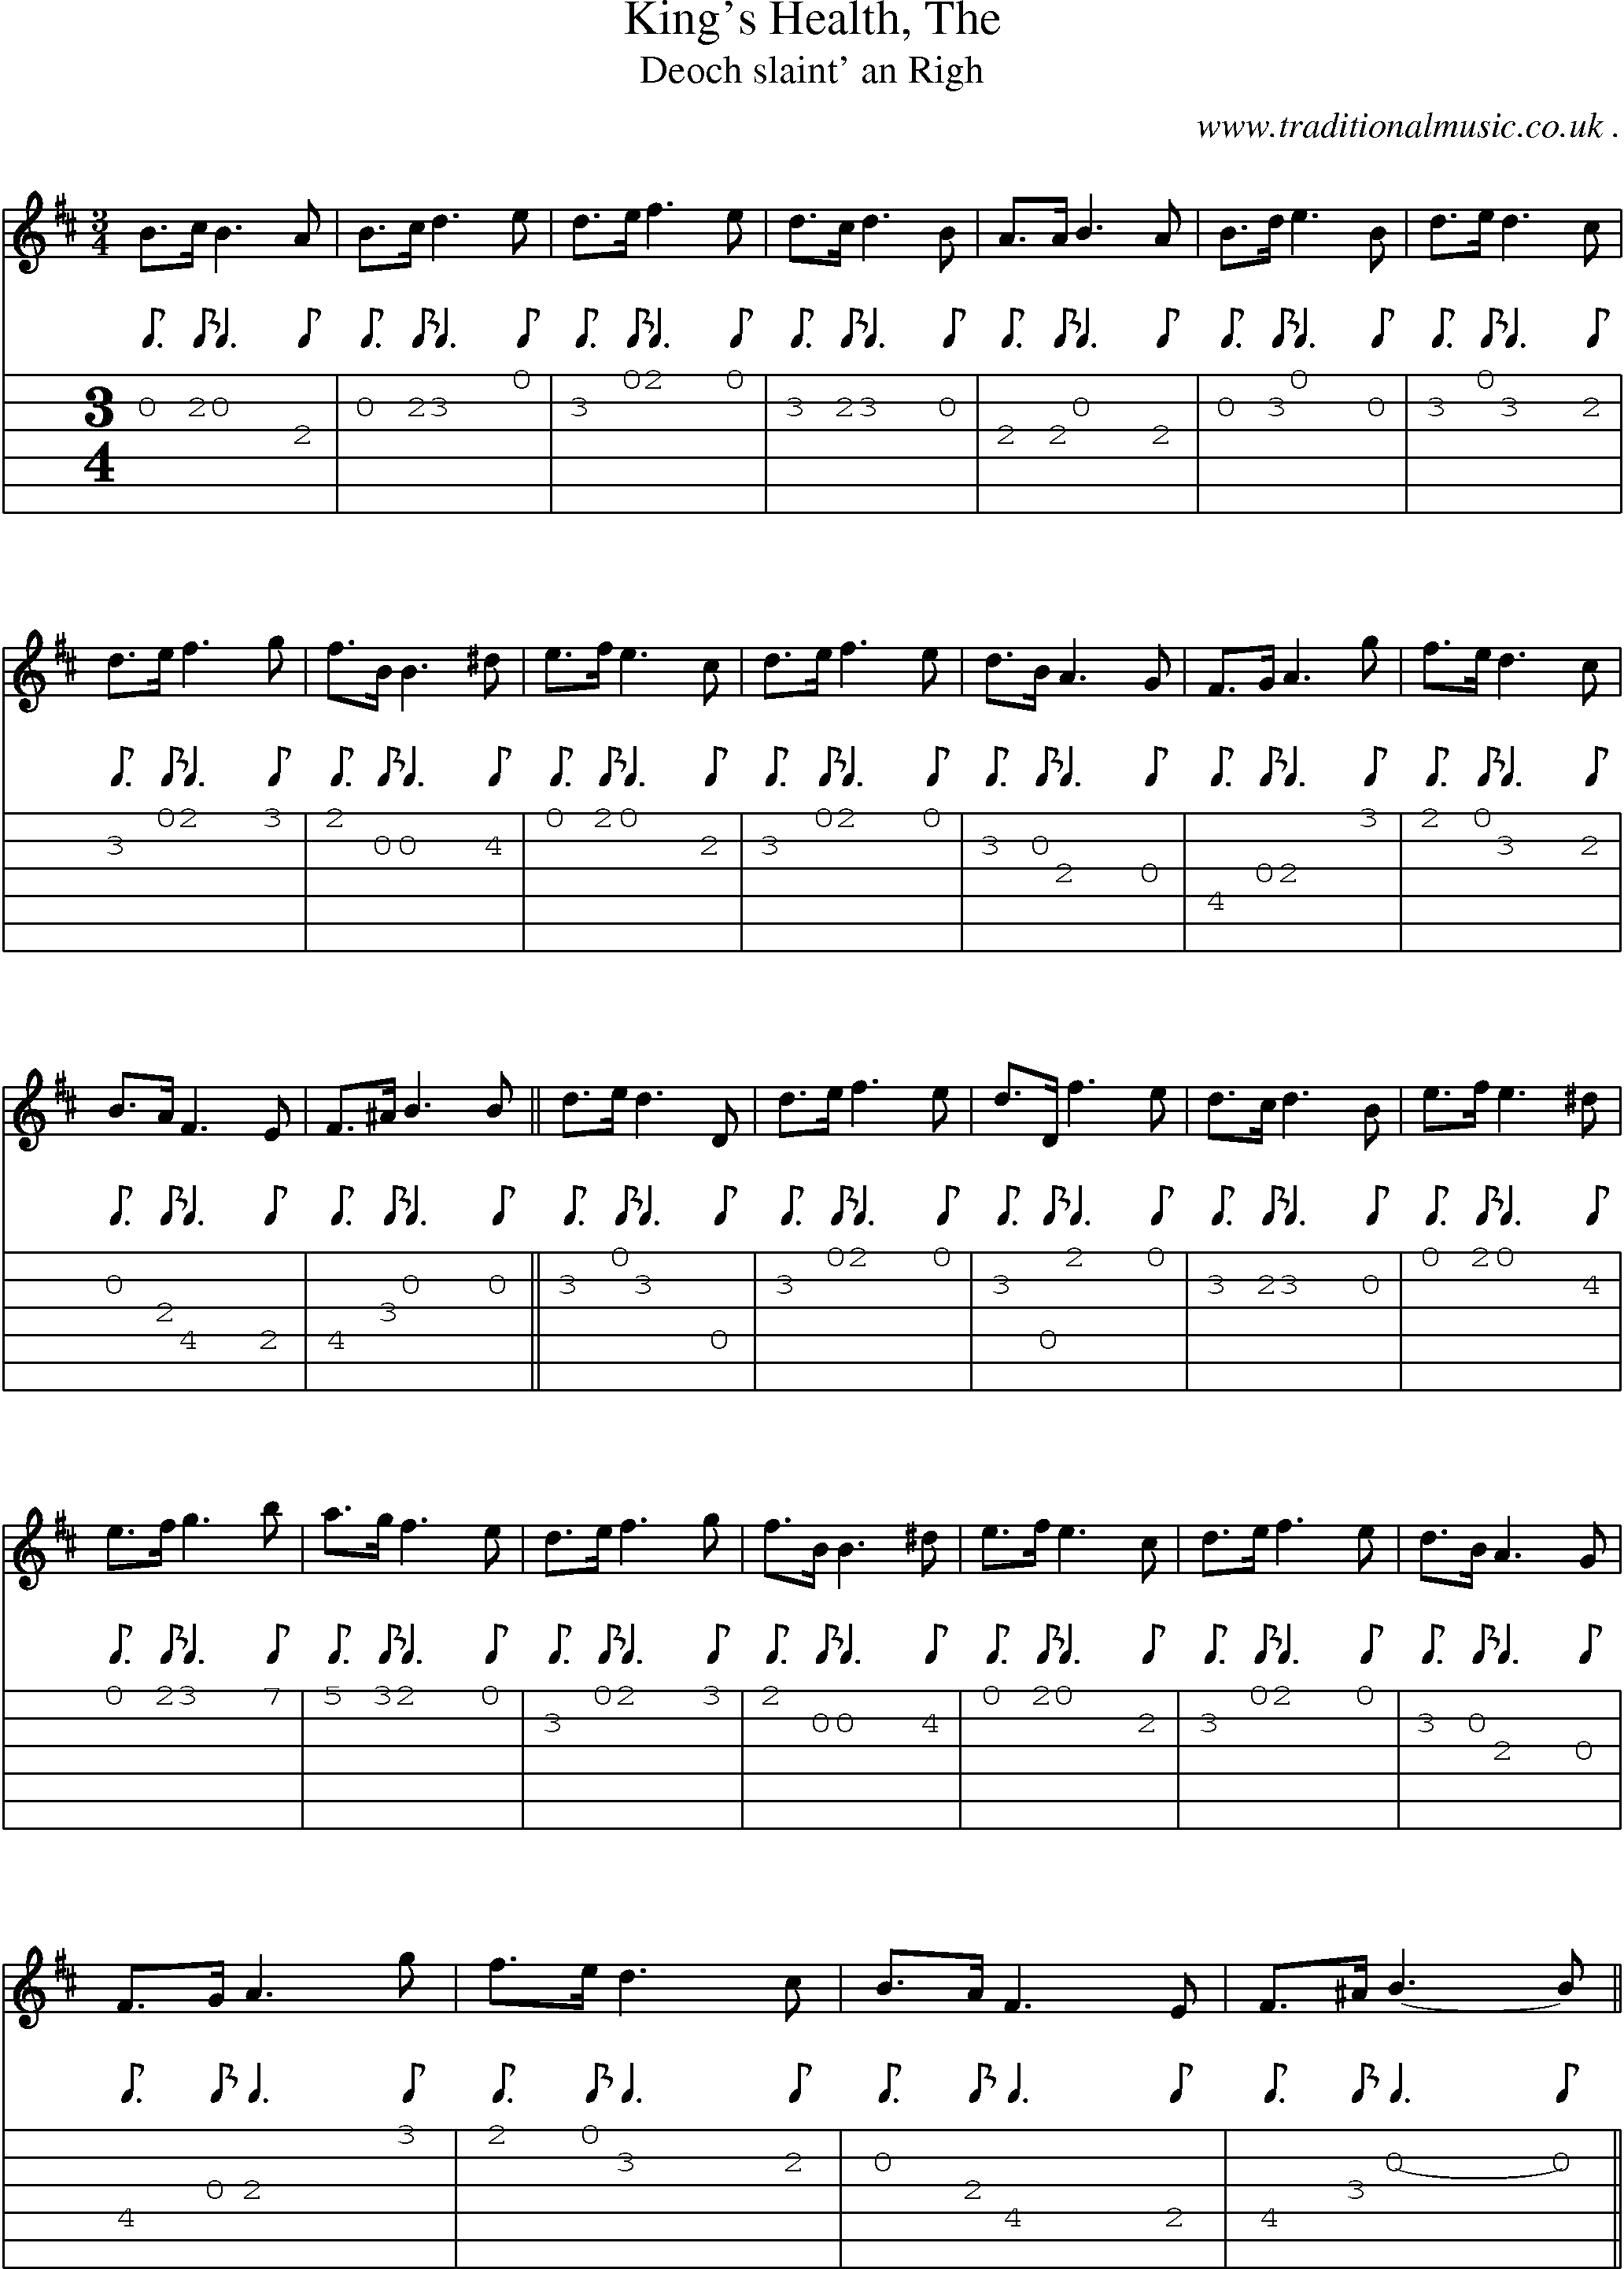 Sheet-music  score, Chords and Guitar Tabs for Kings Health The